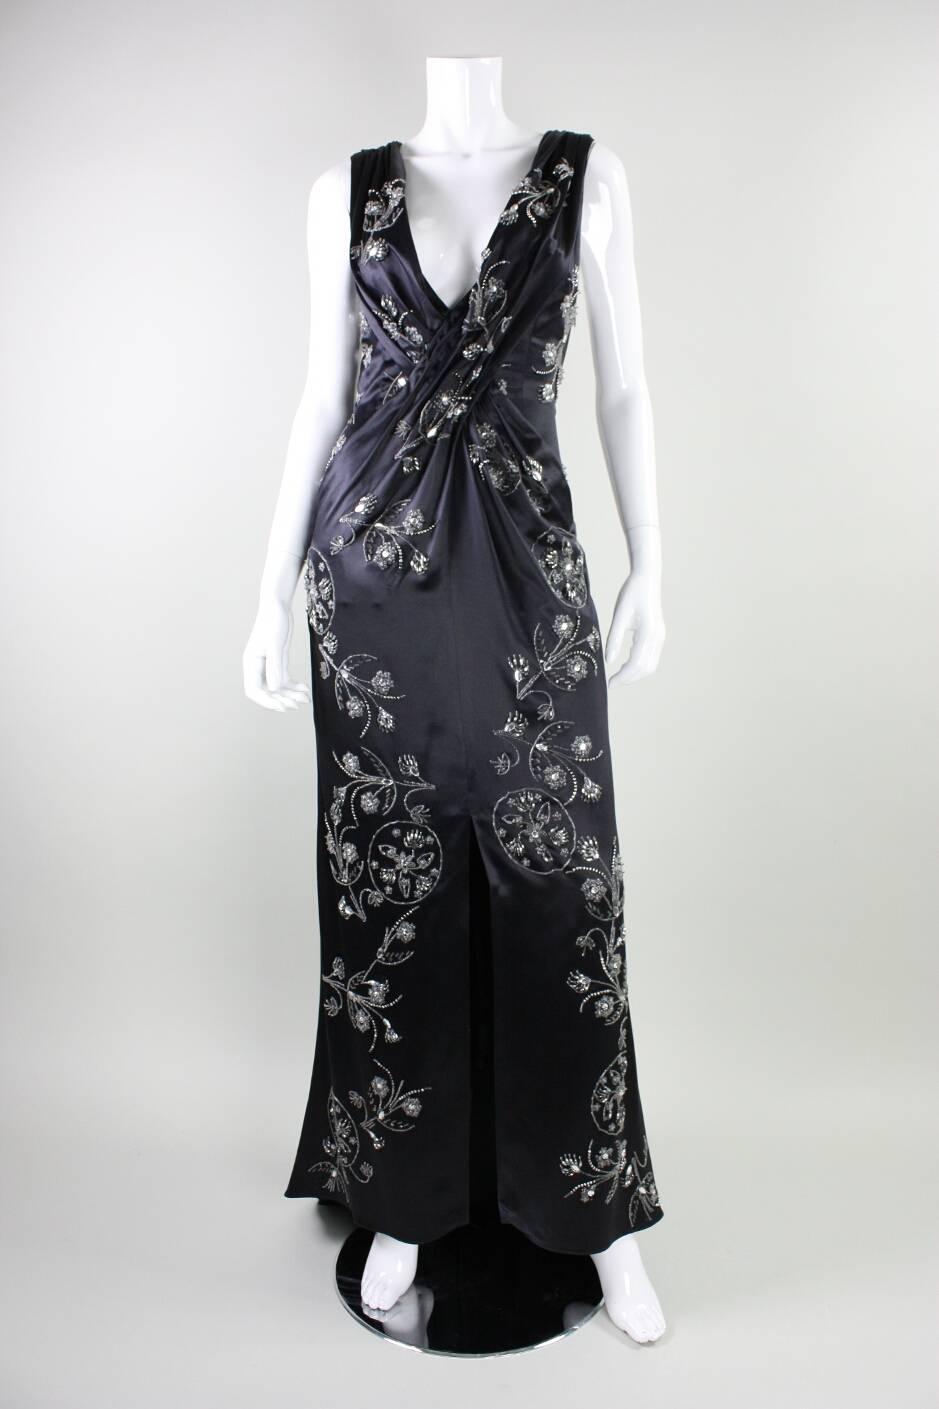 Gorgeous gown from Emanuel Ungaro dates to the 2000's and is made of black satin with beaded floral sprays sewn throughout.  Dramatic plunging neckline with gathers in the fabric below have a slimming effect on the waist.  Center front slit. 